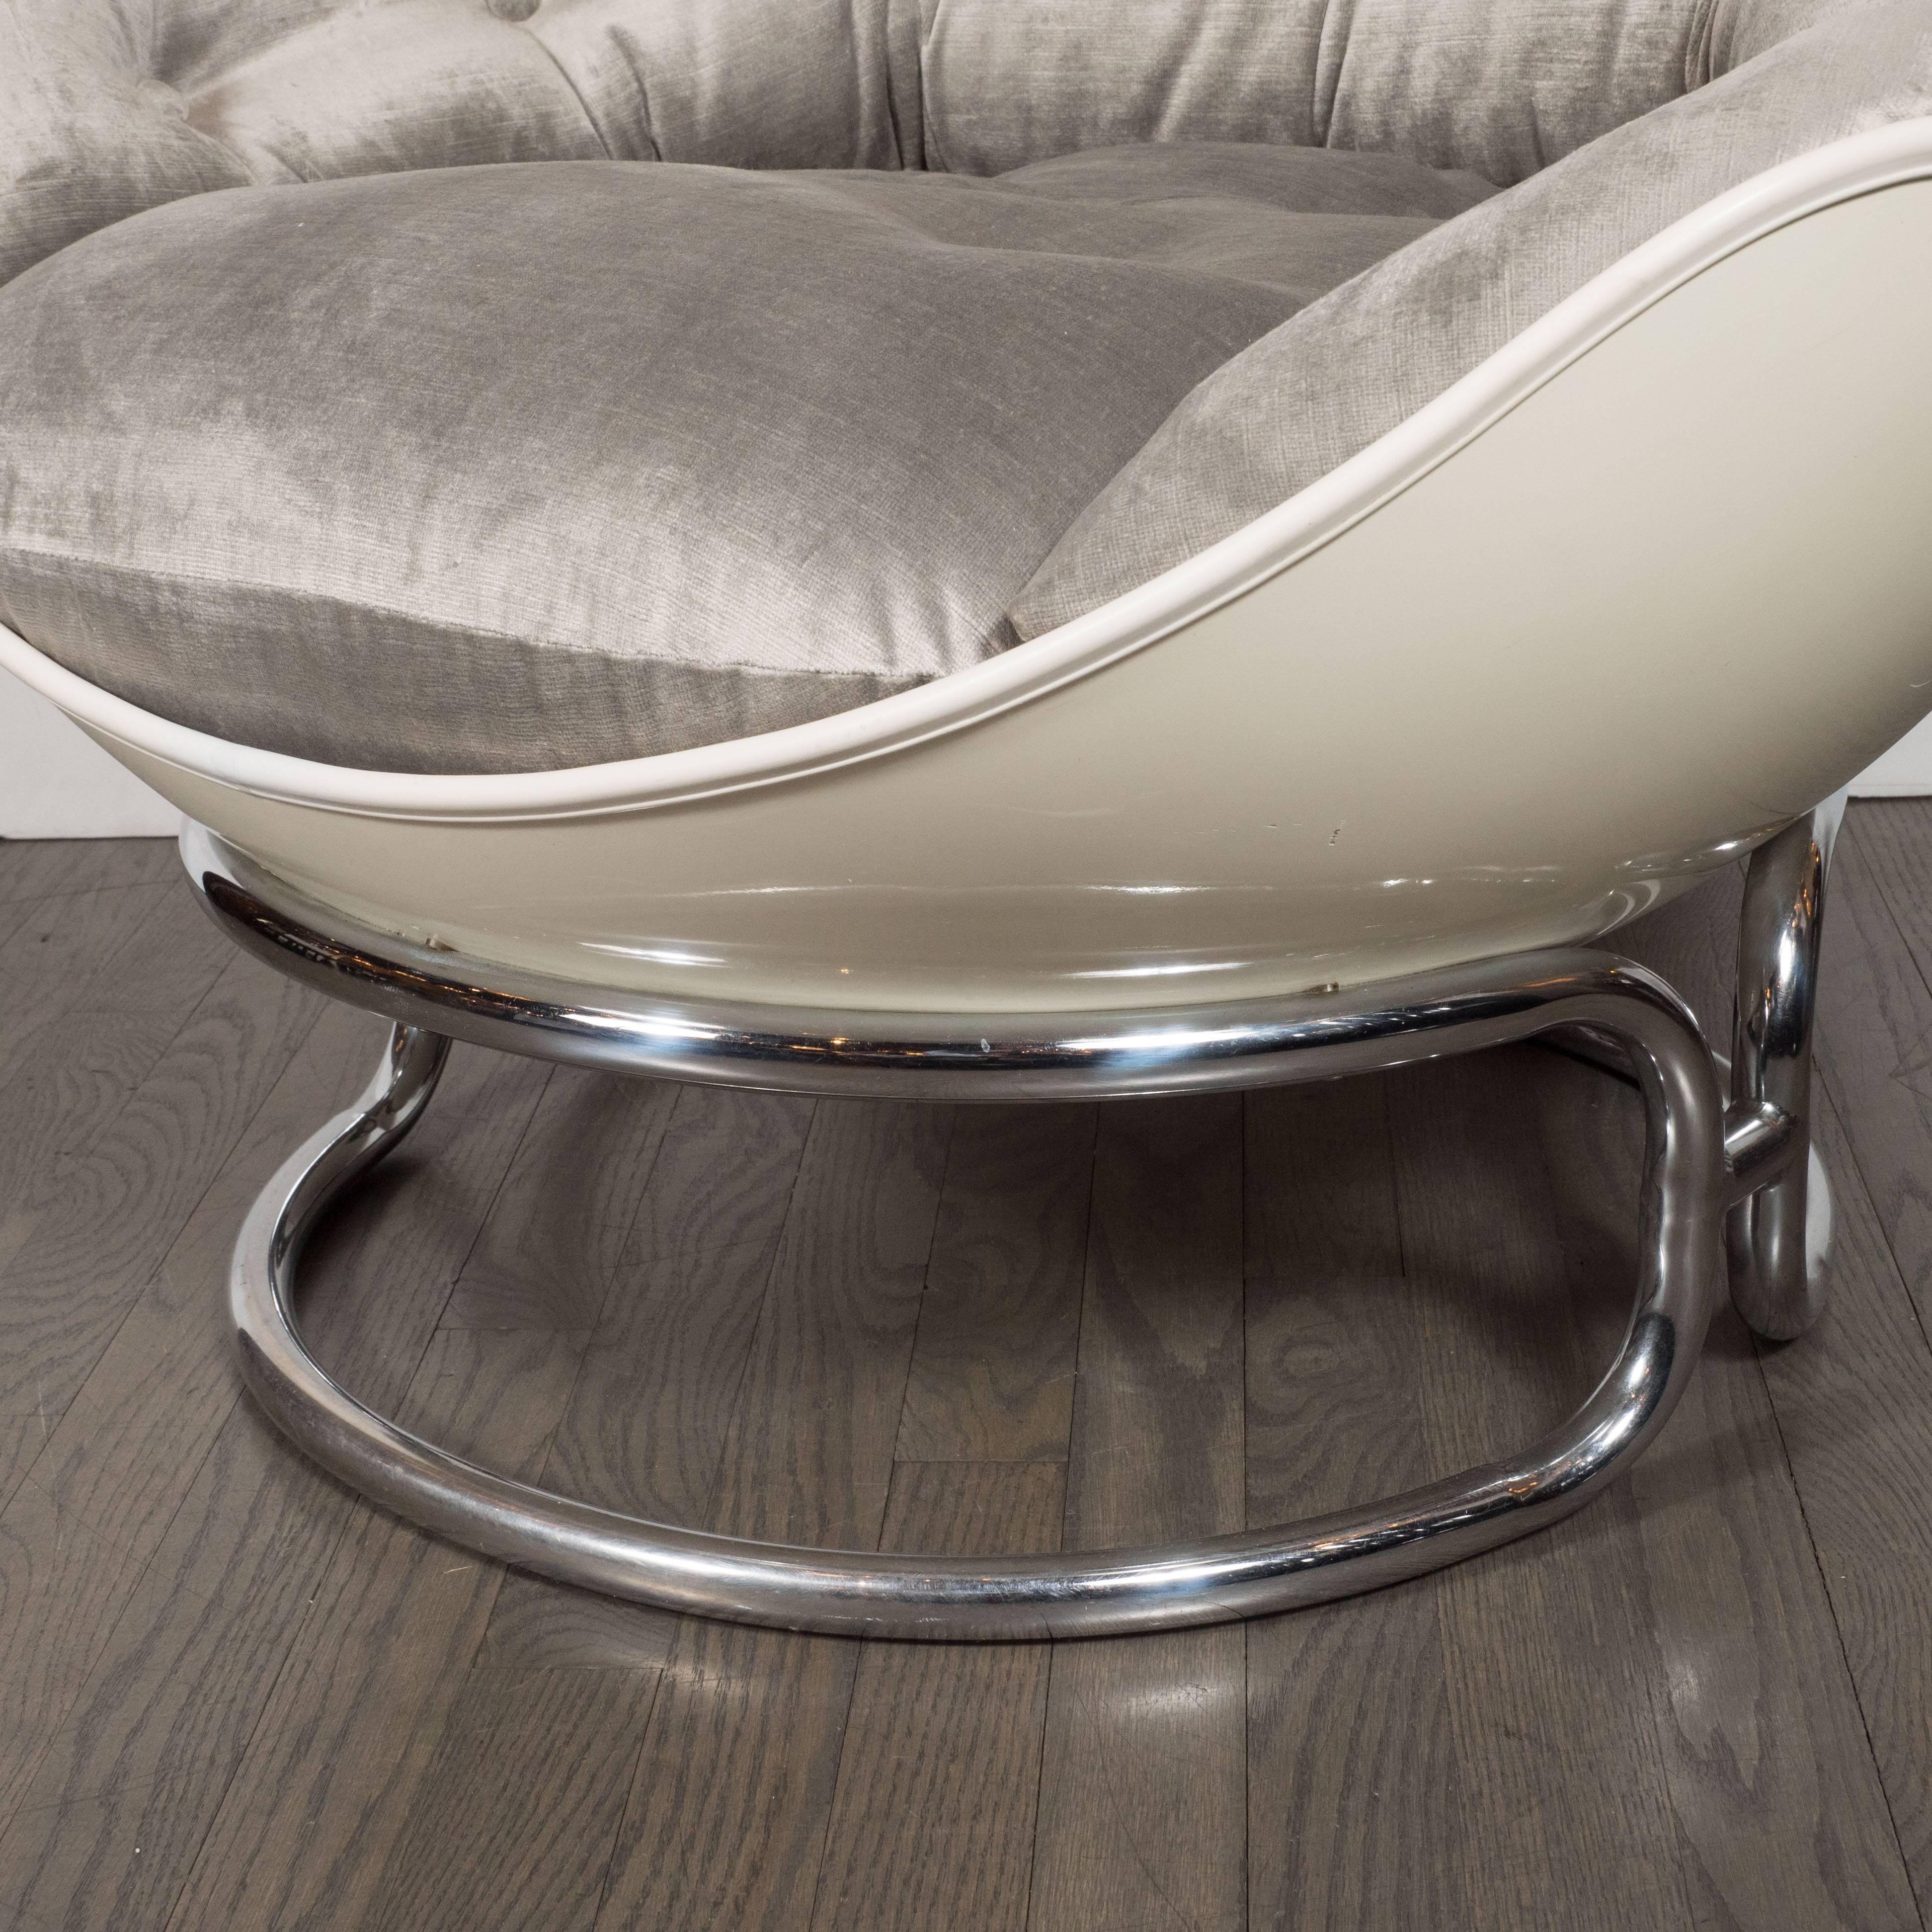 Late 20th Century Pair of French Mid-Century Modern Chrome and Fiberglass Lounge Chairs, Airborne